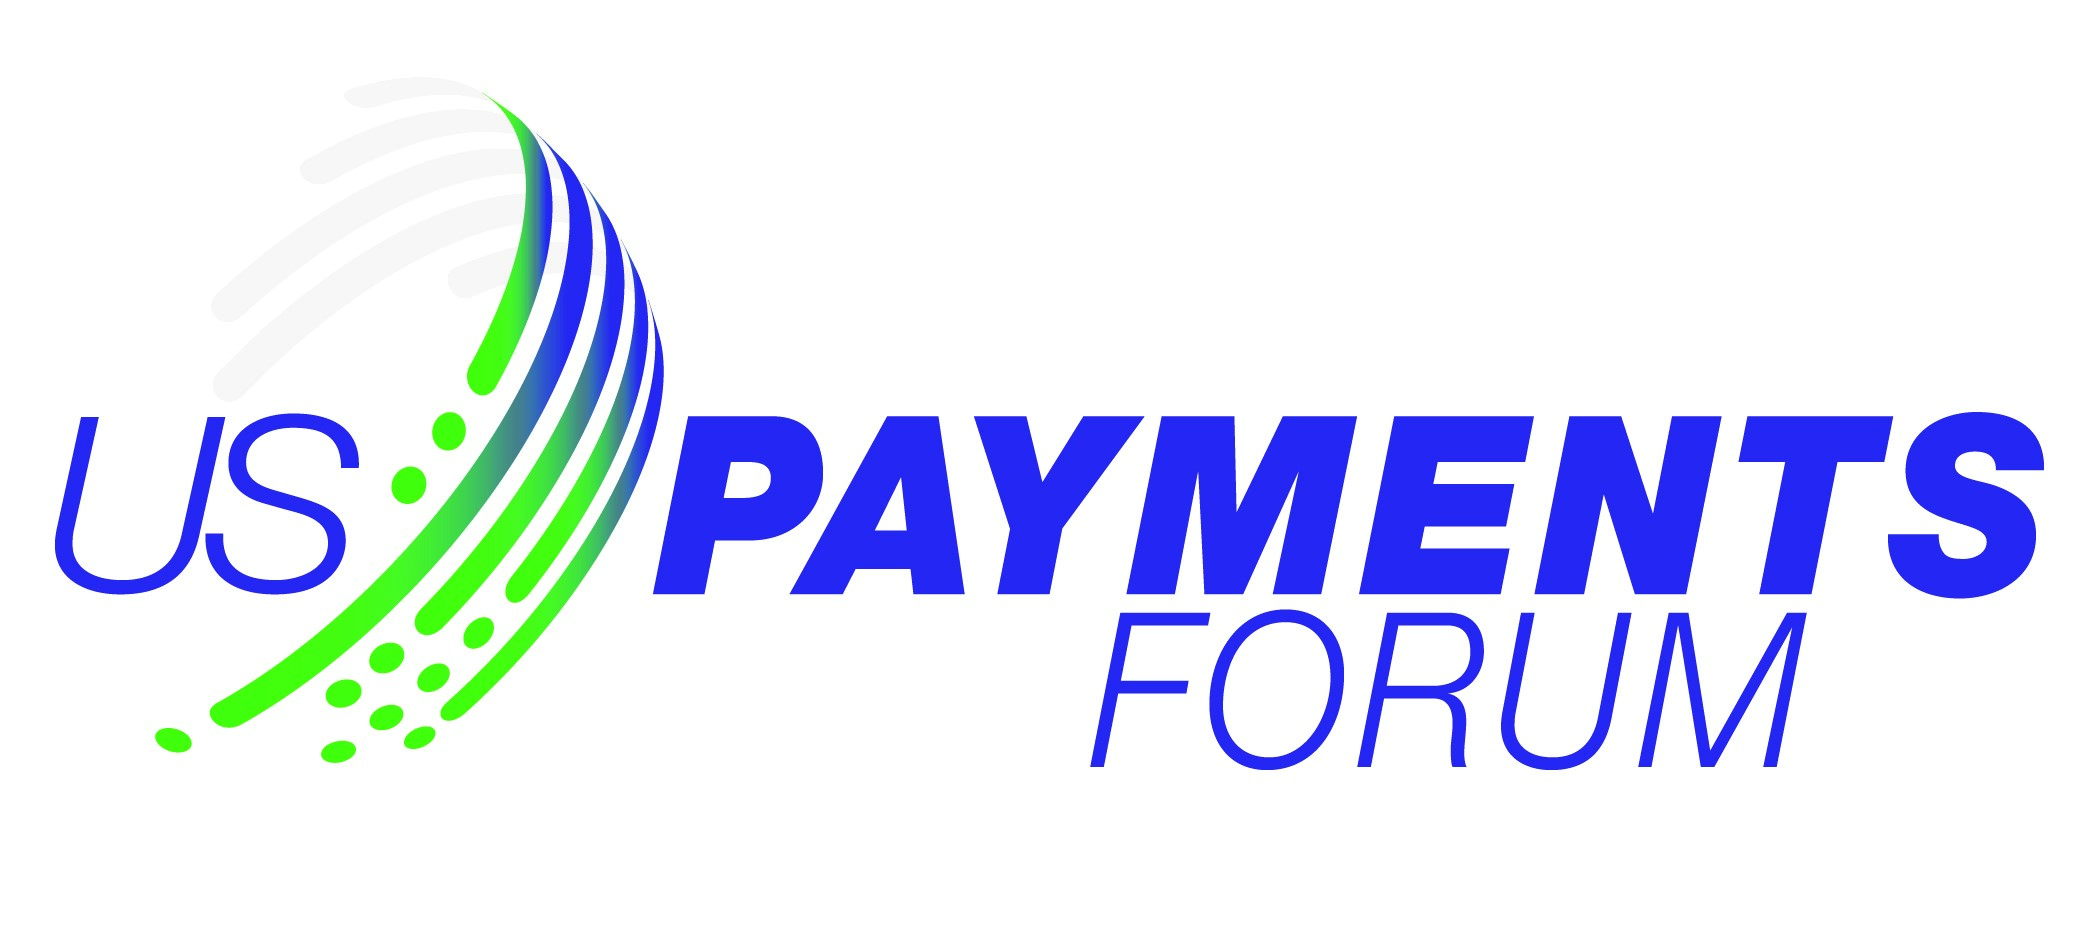 US Payments Forum Fall Market Snapshot: Next Steps for Contactless, Fraud in Focus, Alternative Payment Boom